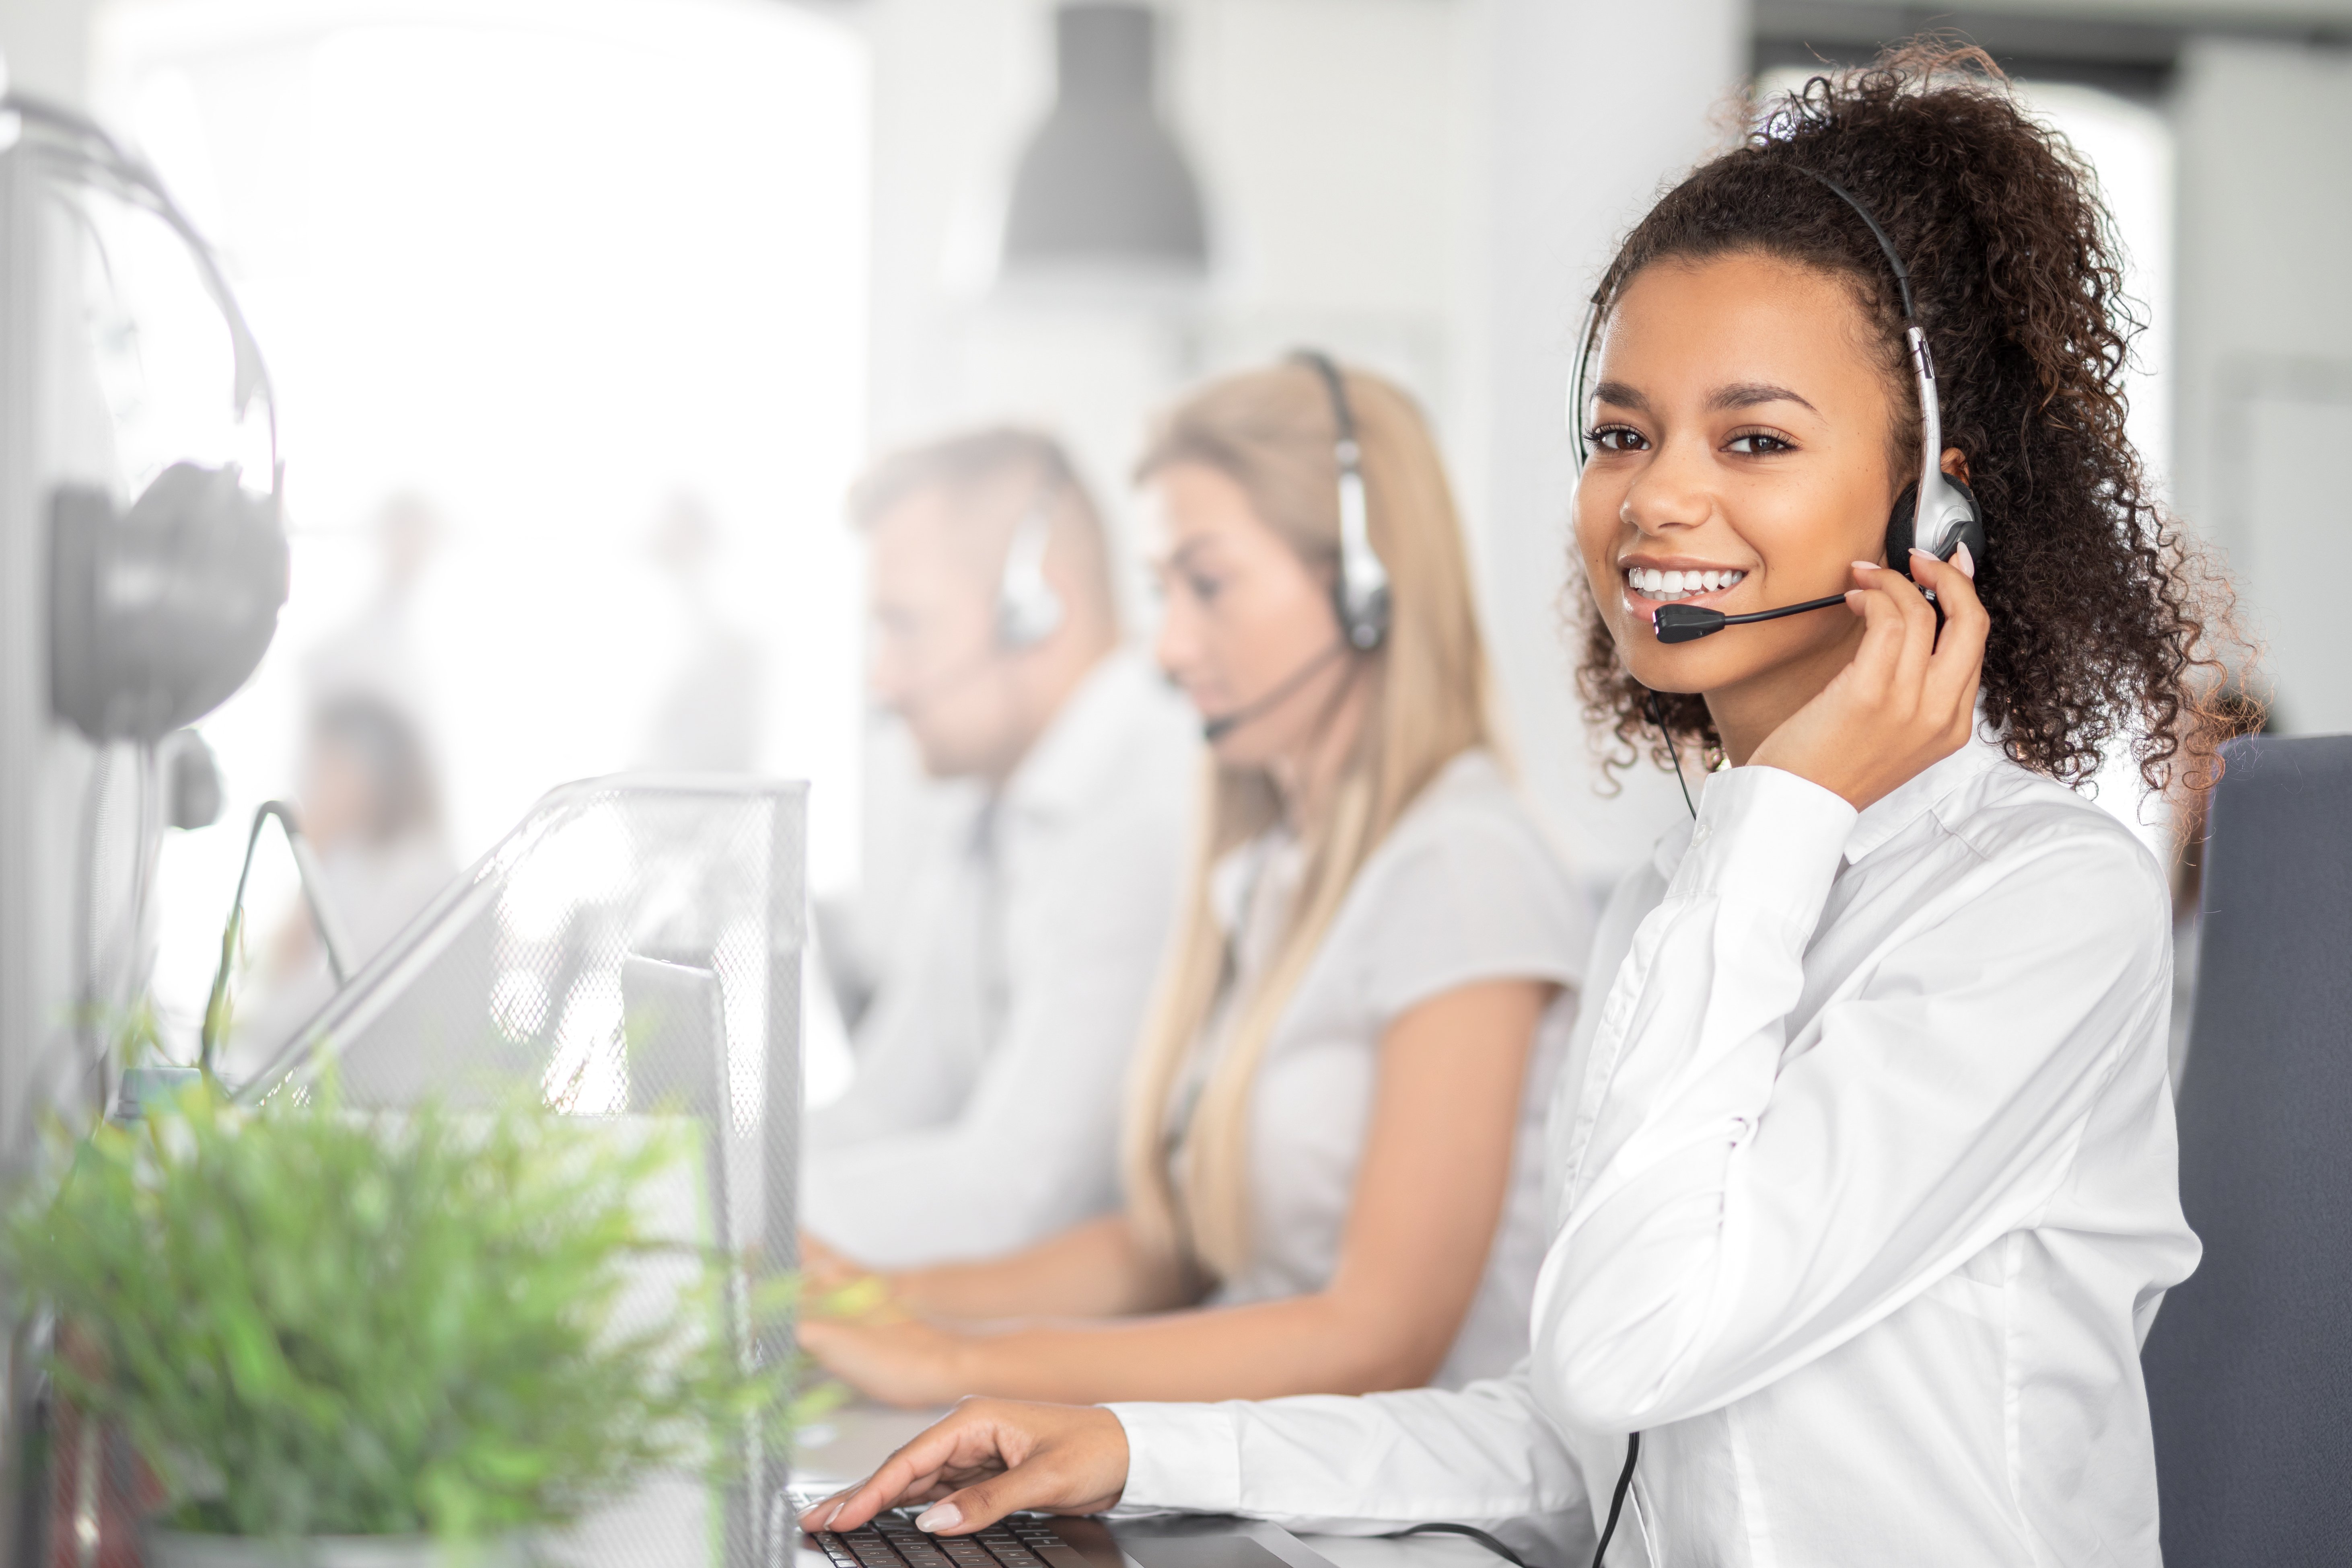 Customer Service & Support Solutions